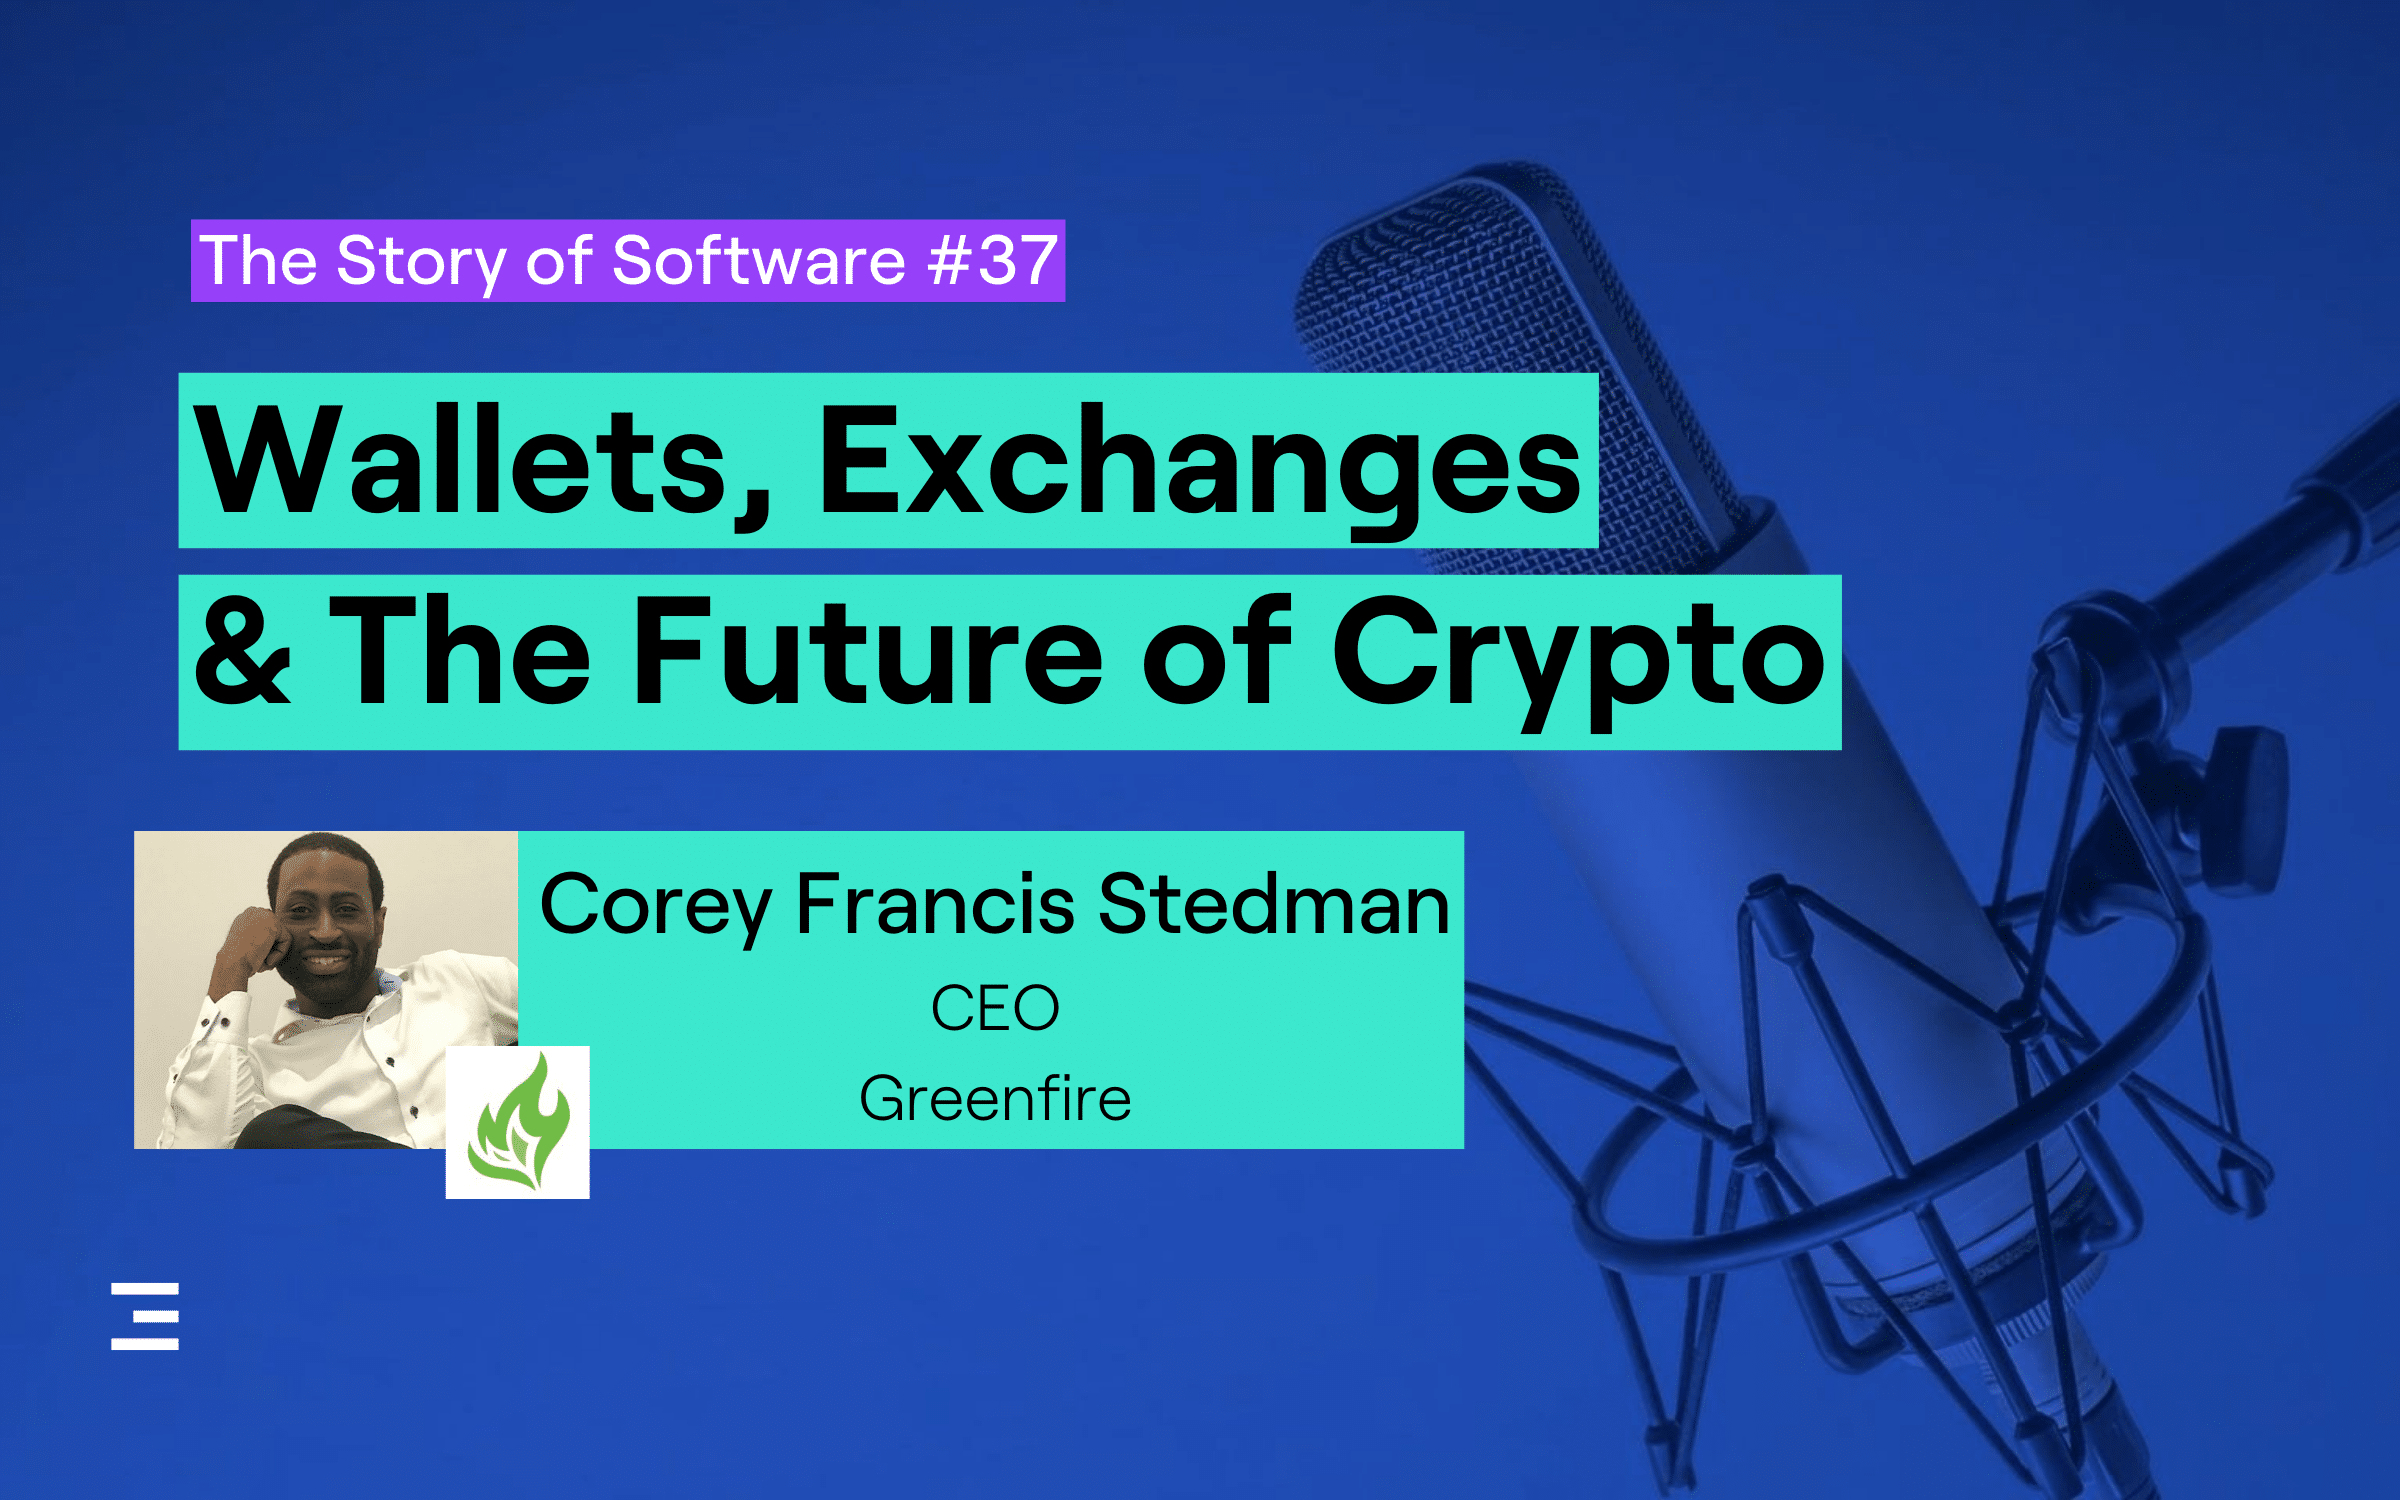 crypto wallets and exchanges on episode 27 of story of software podcast